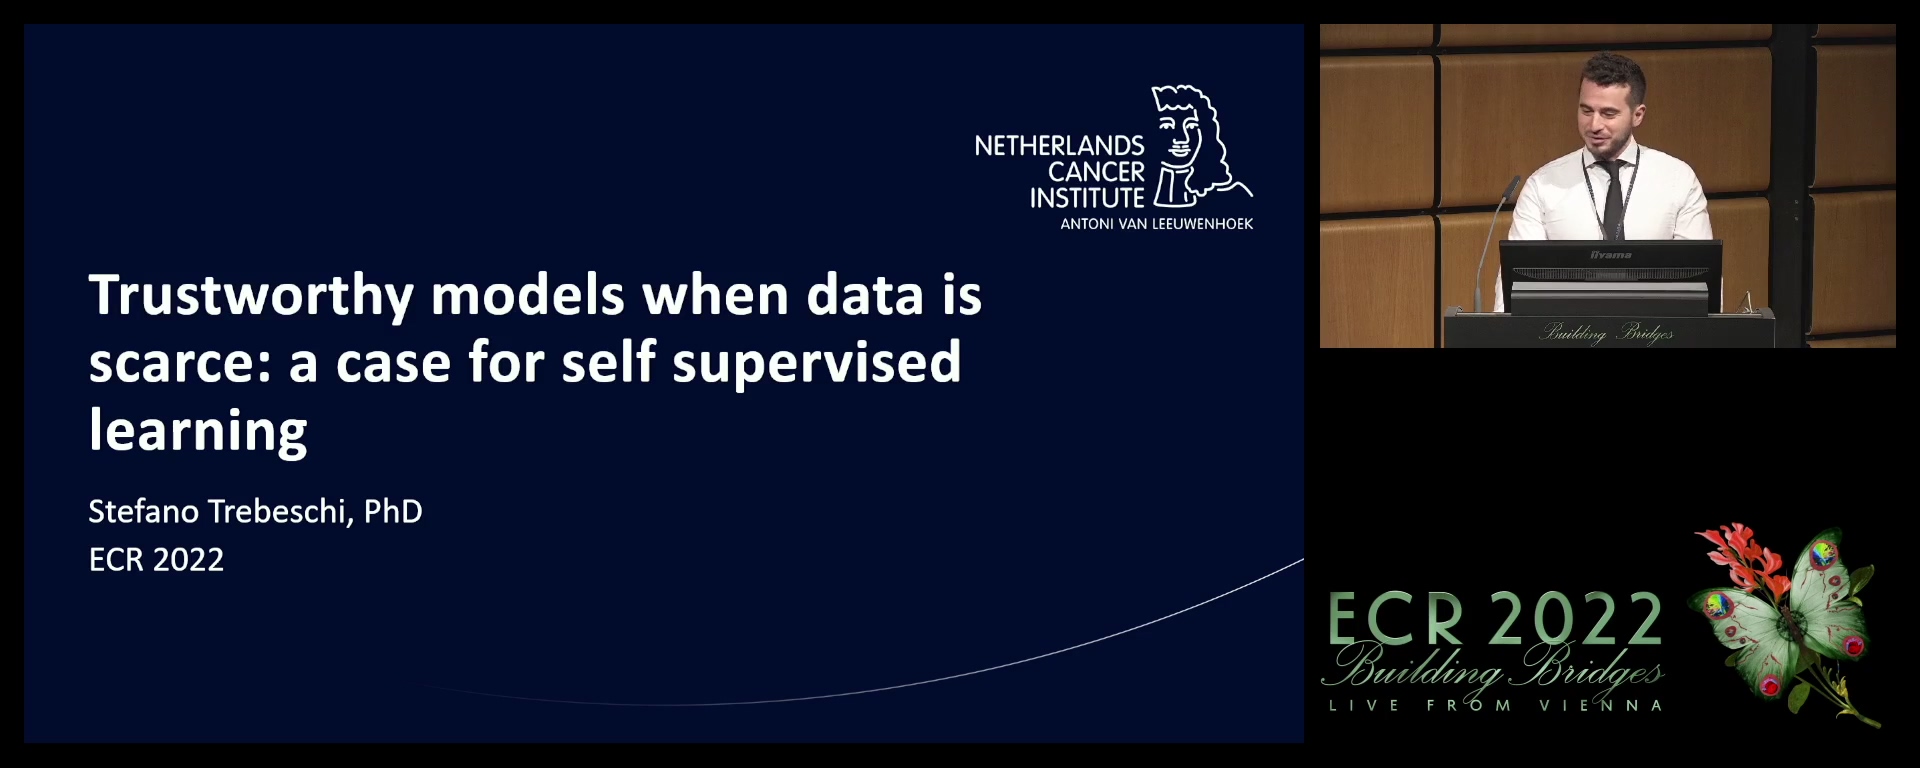 Trustworthy models when data is scarce: a case for self supervised learning - Stefano Trebeschi, Amsterdam / NL